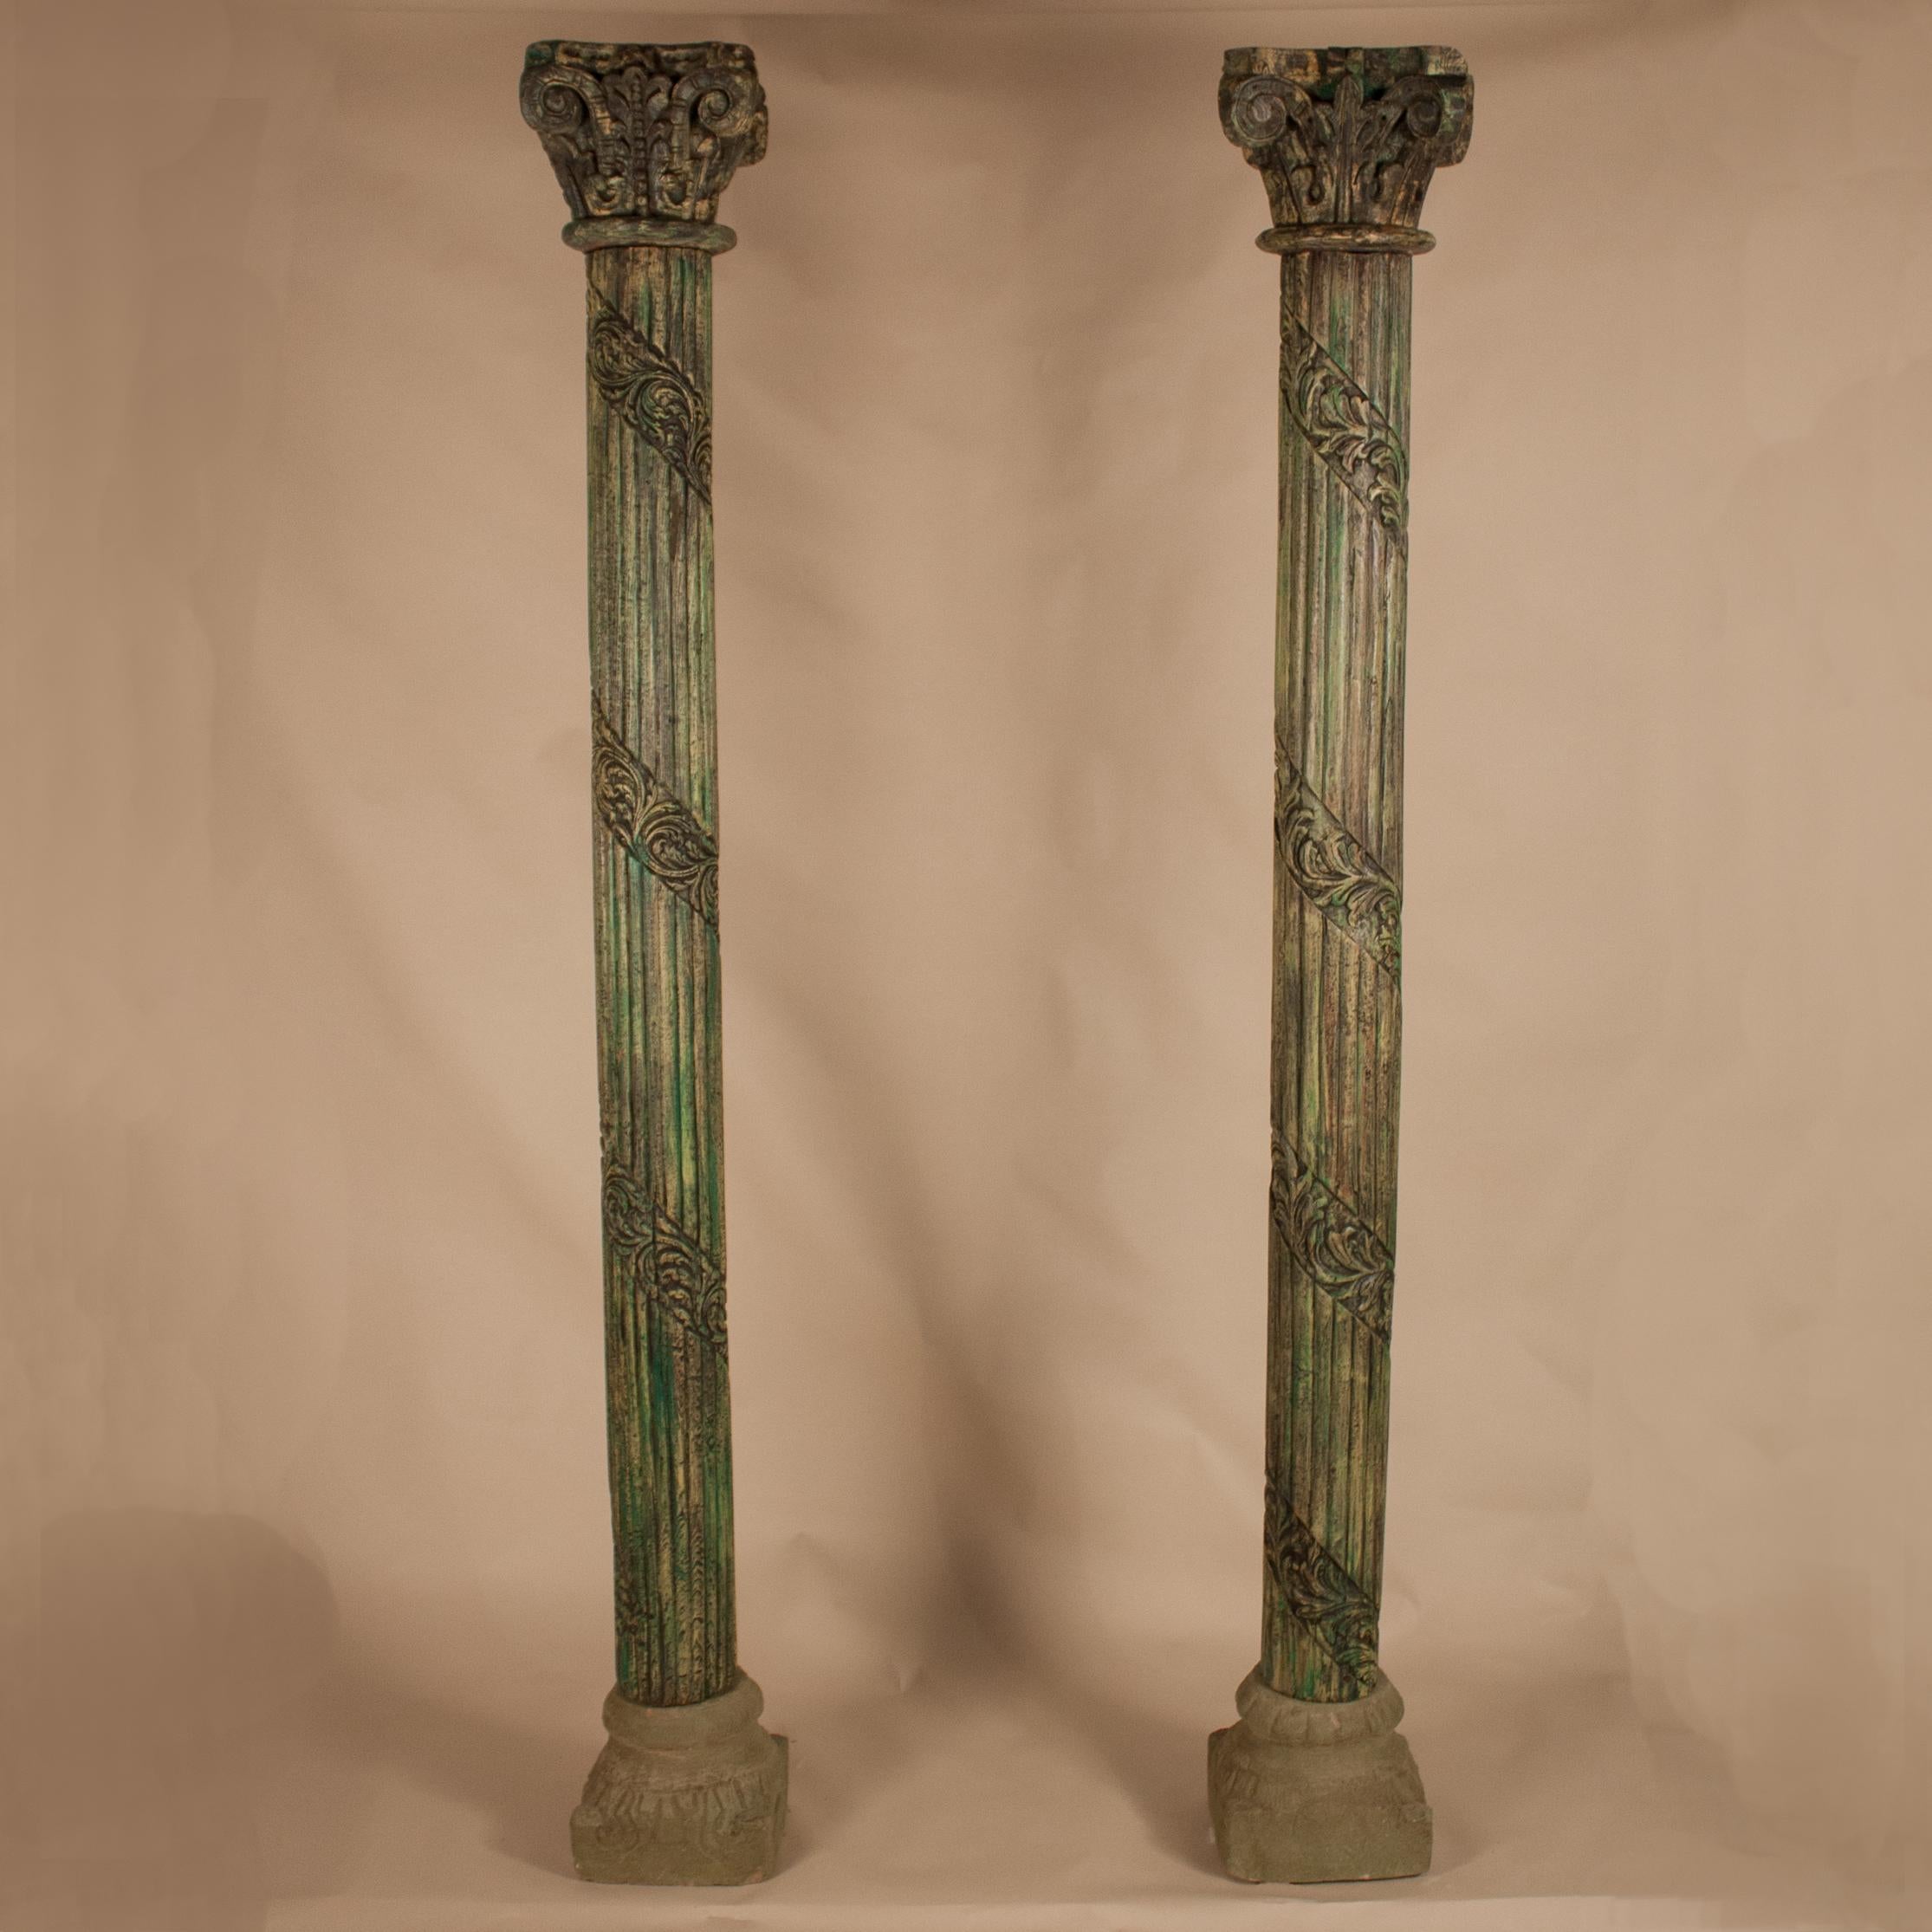 Distinctive set of teak wood columns from Gujarat, India, circa 1950, with original green paint and hand-carved, ribboned flutes and Corinthian capitals. The column bases, which have a small footprint, are made of sandstone and have weathered, yet